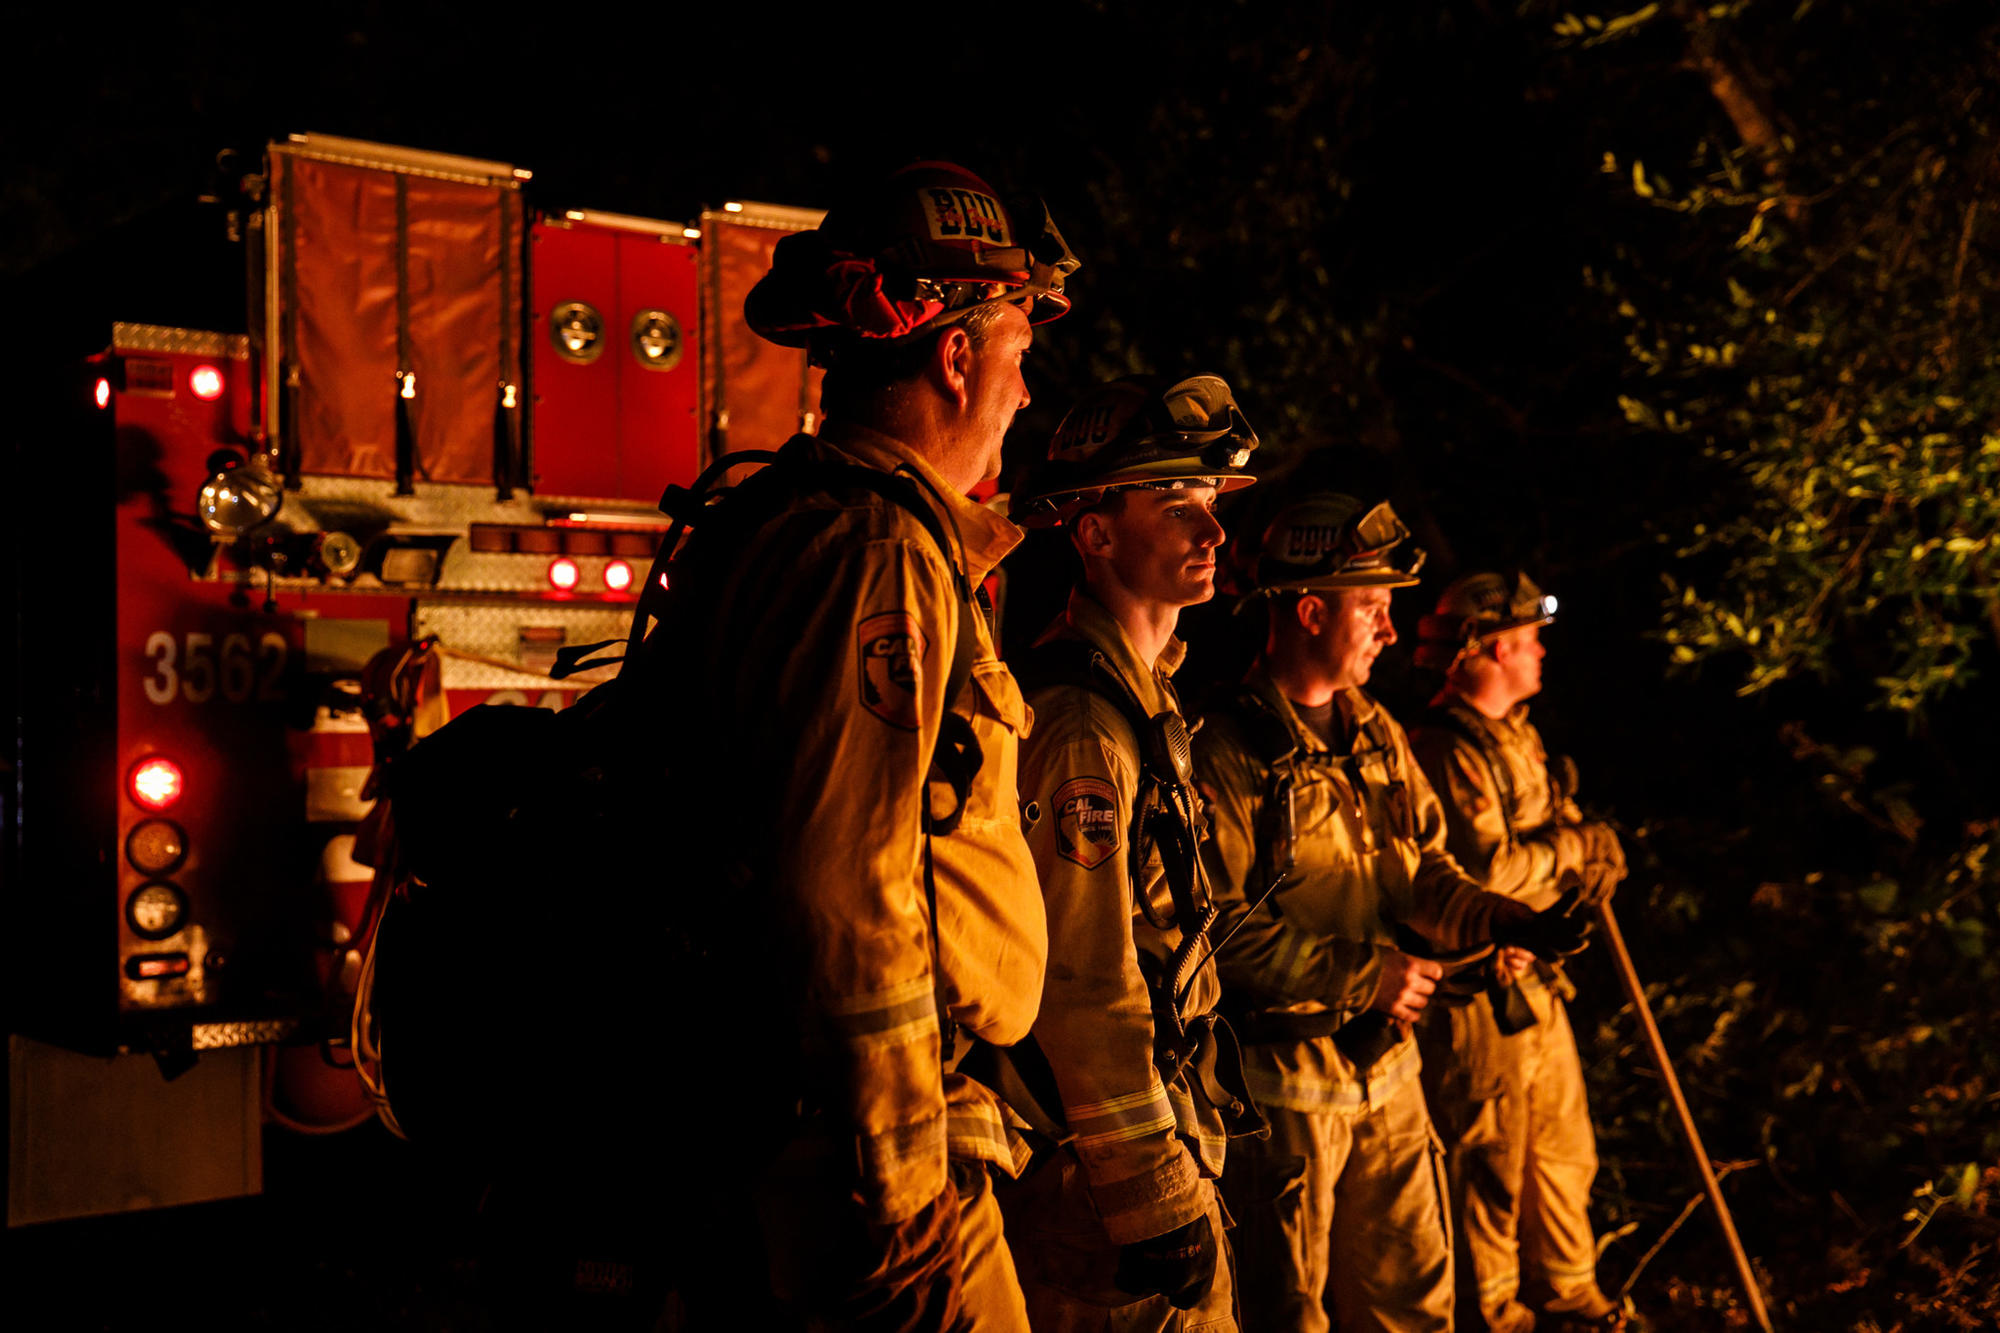 From left, firefighters Gary Mattingly, Tim Zanotelli, Brandon Tolp and Devon Elenburg, all based in San Bernardino, stand ready to swing into action along Highway 29 north of Calistoga on Oct. 12.